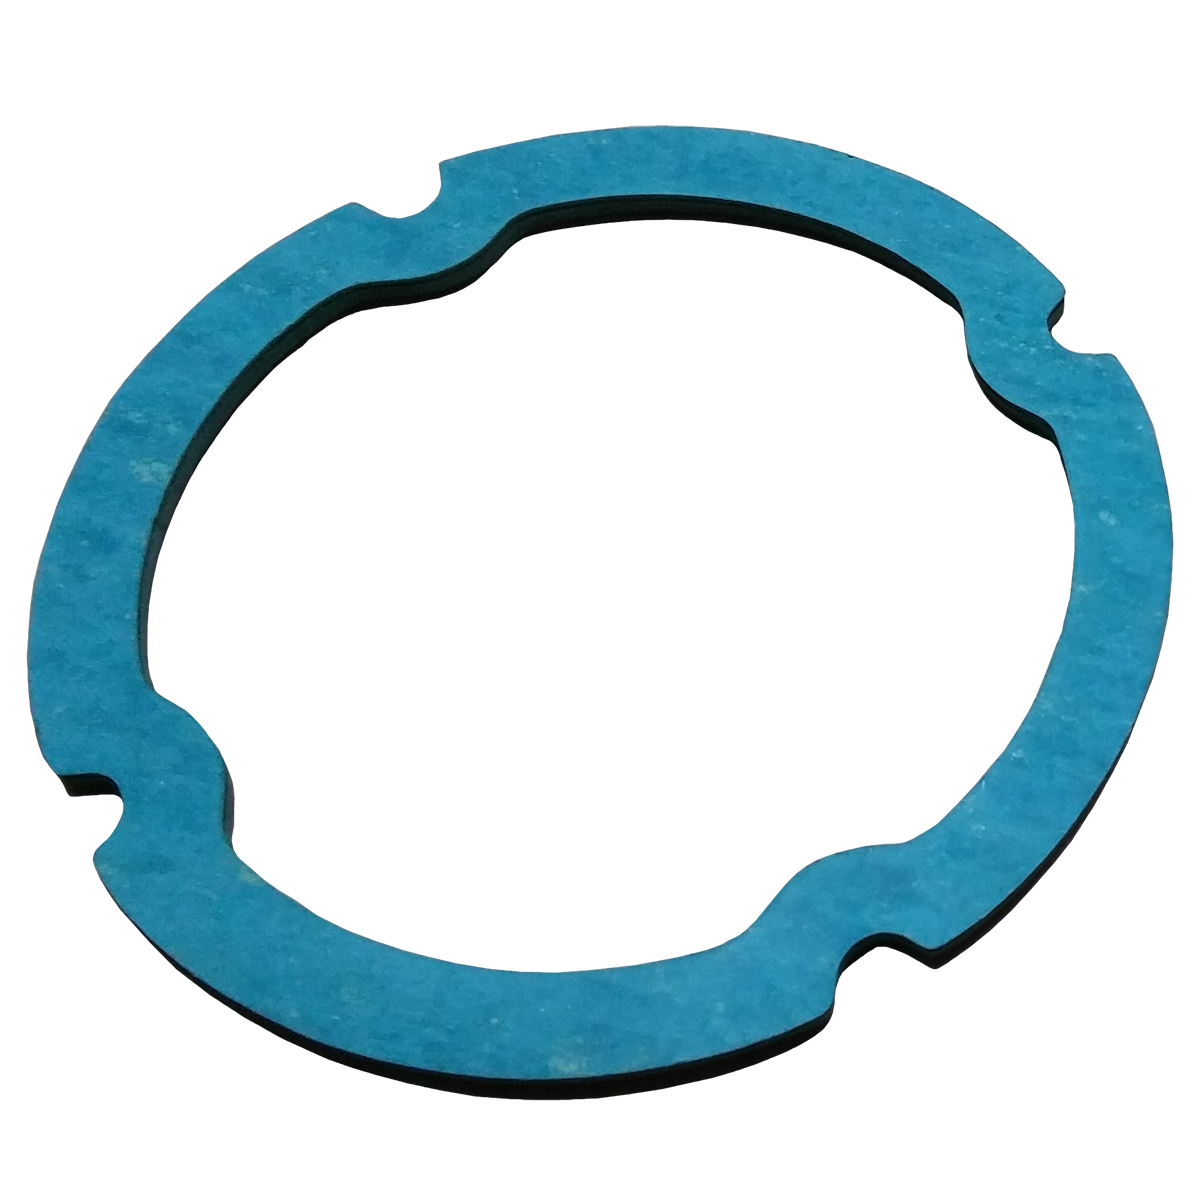 Custom Gaskets made from BlueGuard 3000 Compressed Fibre Gasket Material.